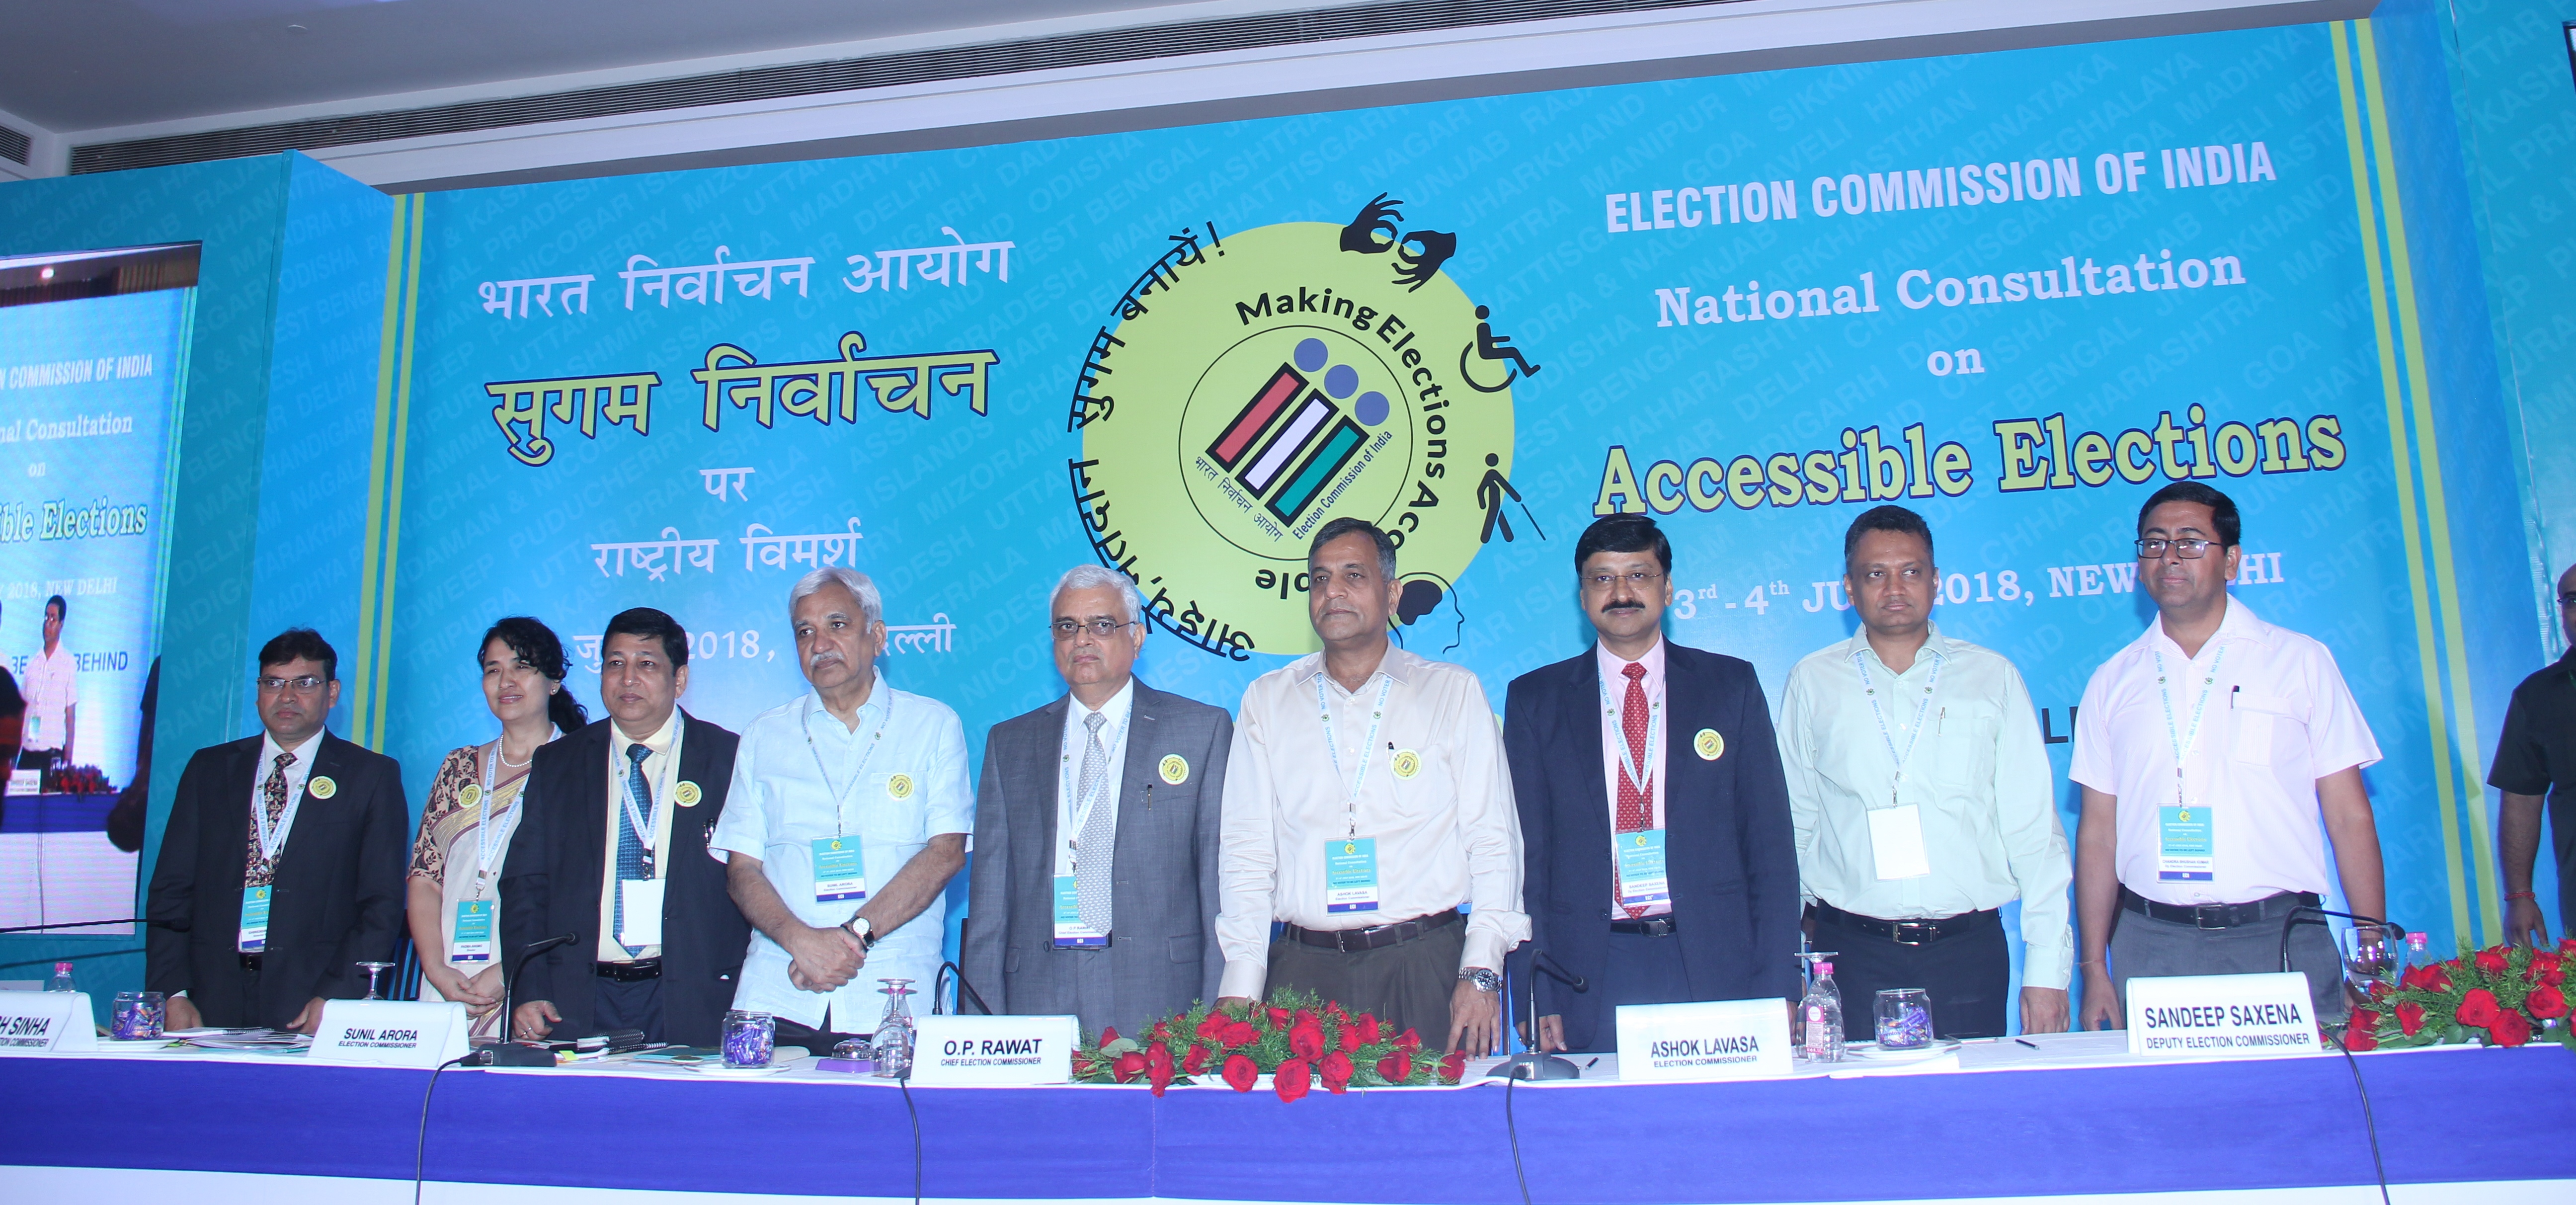 Photo Caption: Chief Election Commissioner Shri OP Rawat, (fifth from left) in the presence of Election Commissioners Shri Sunil Arora (fourth from left) and Shri Ashok Lavasa. (fourth from right) at the National Consultation on Accessible Elections 